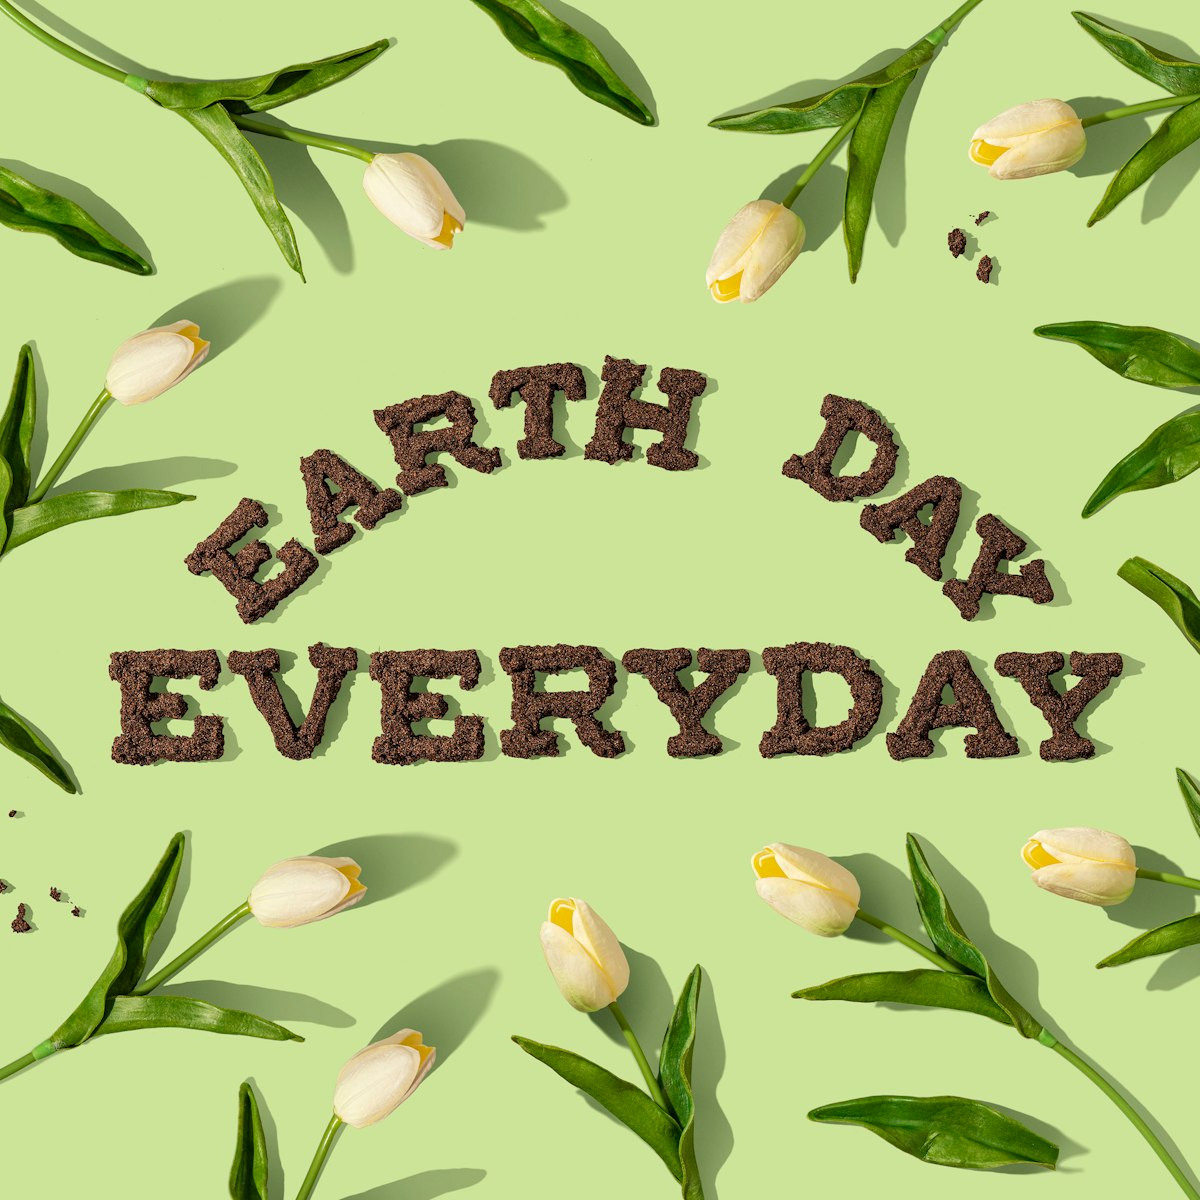 earth day: every small act matters